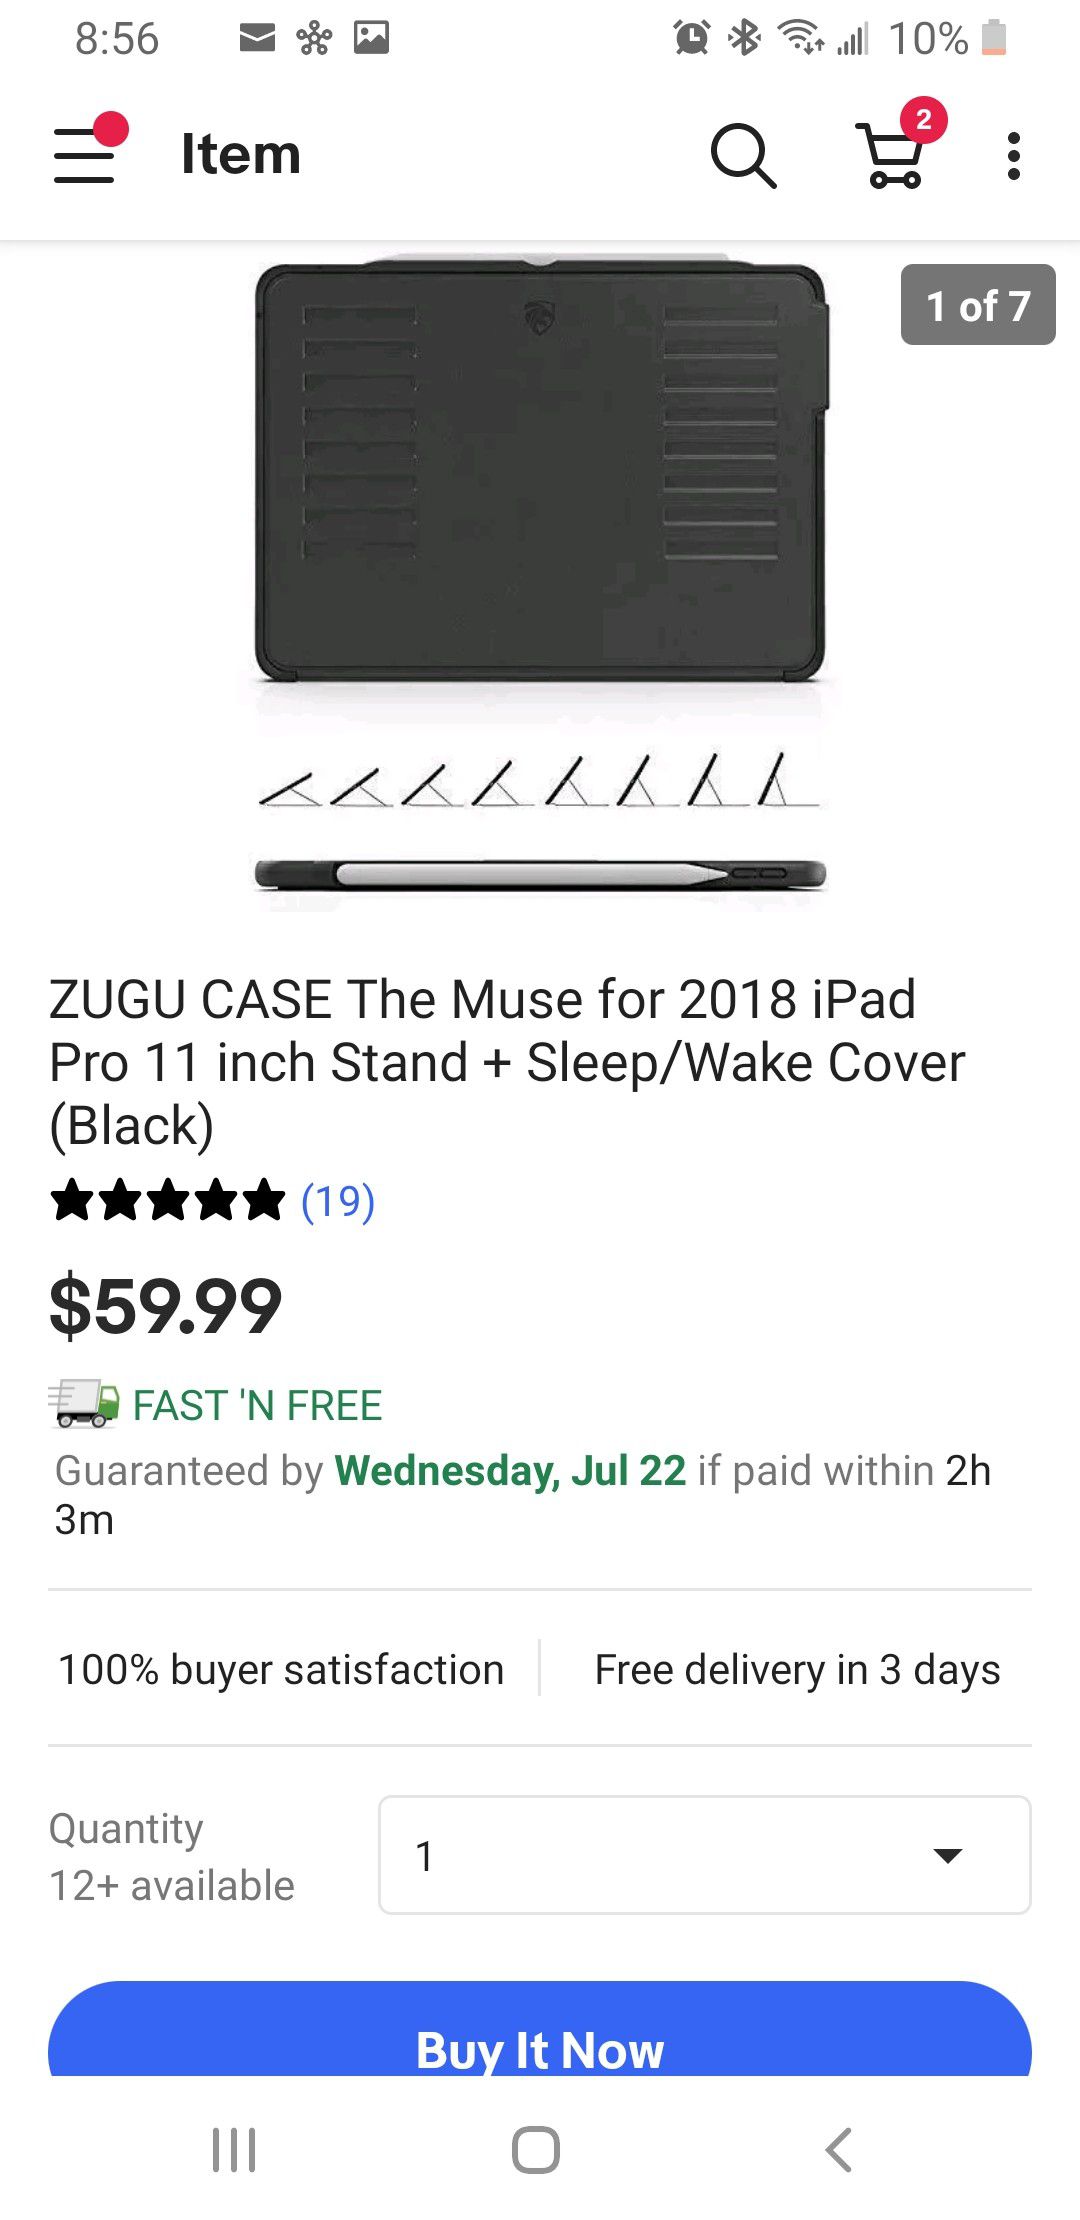 ZUGU CASE The Muse for 2018 iPad Pro 11 inch